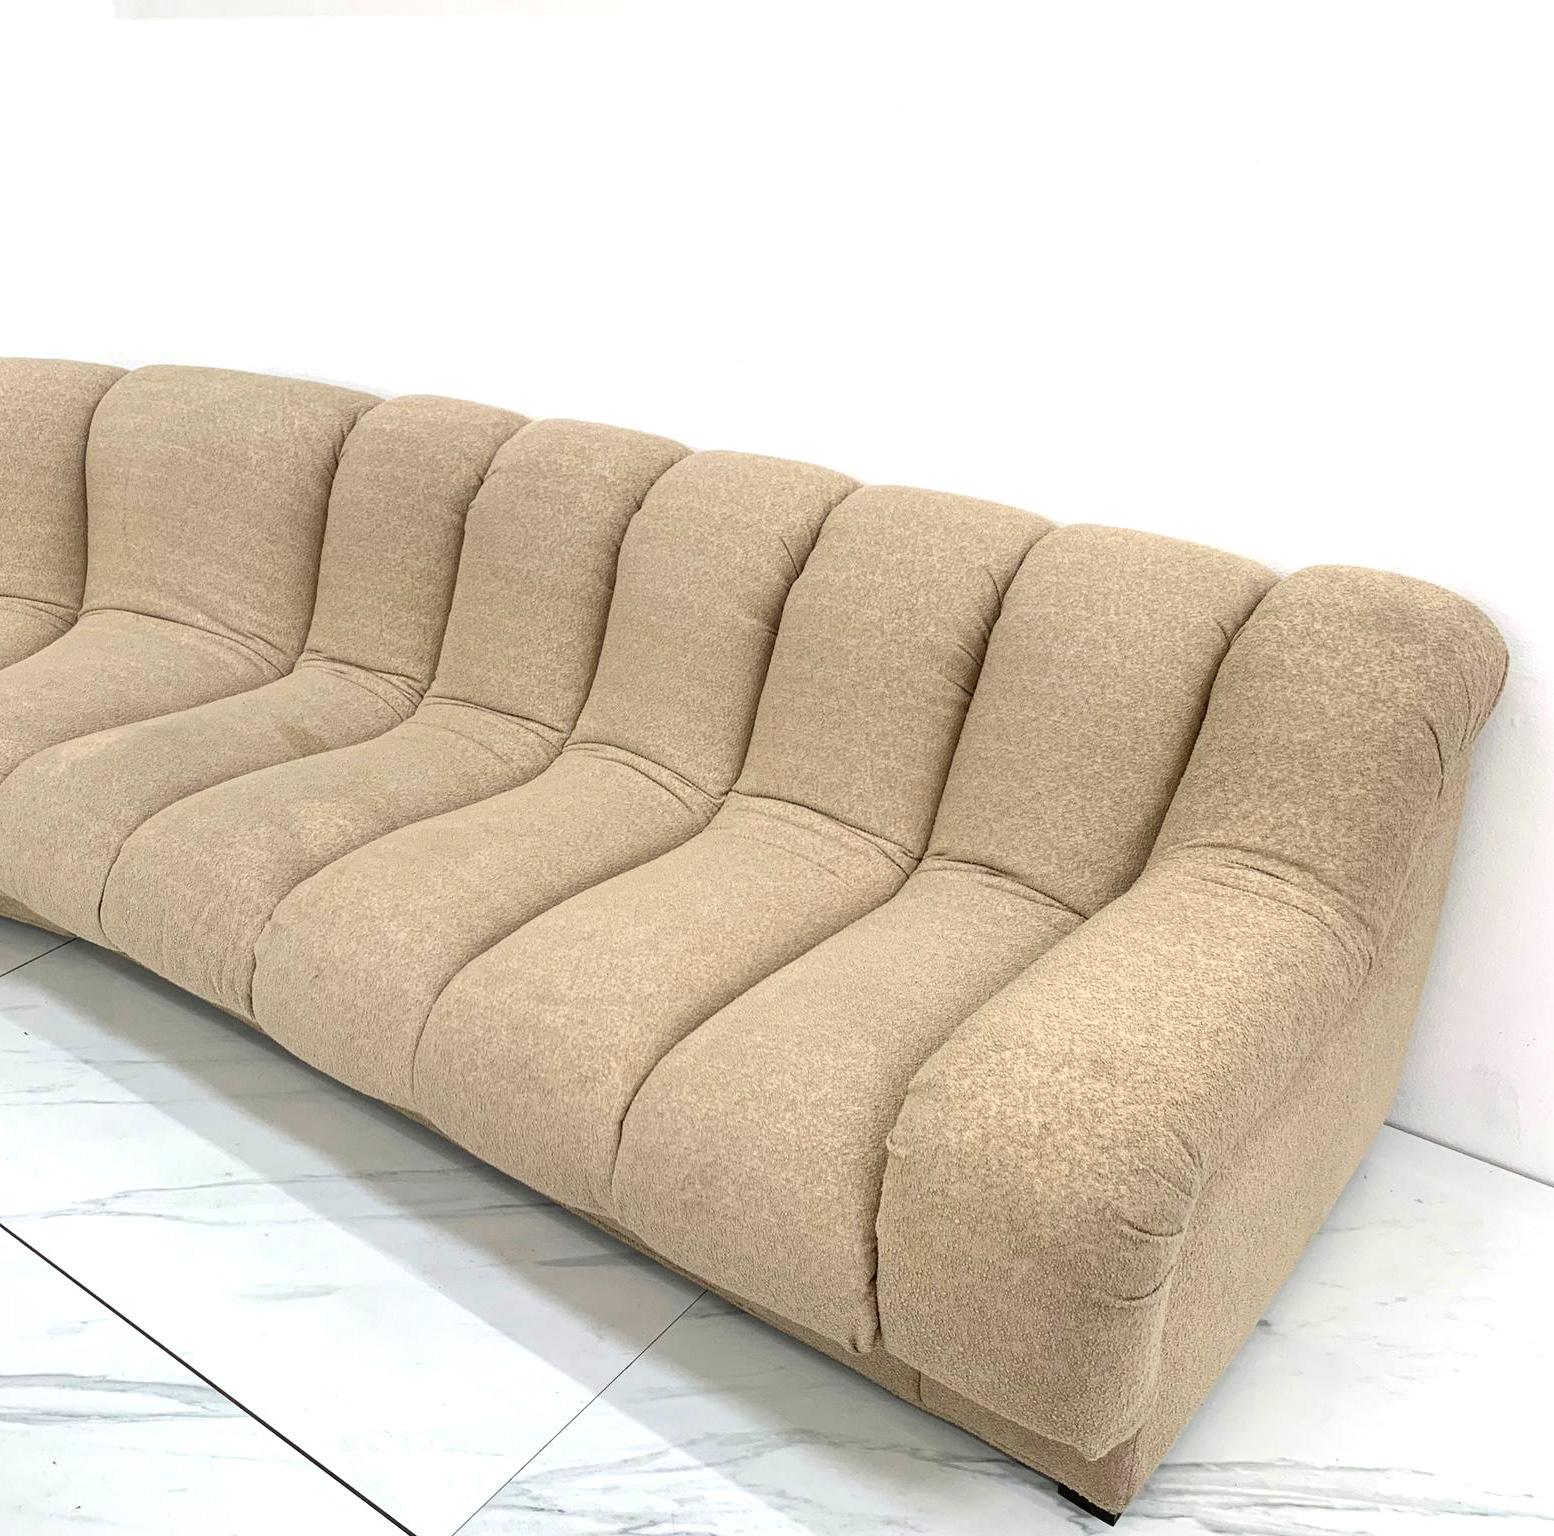 Fabric Modular 1990's Nonstop Style Channel Tufted Sectional Sofa